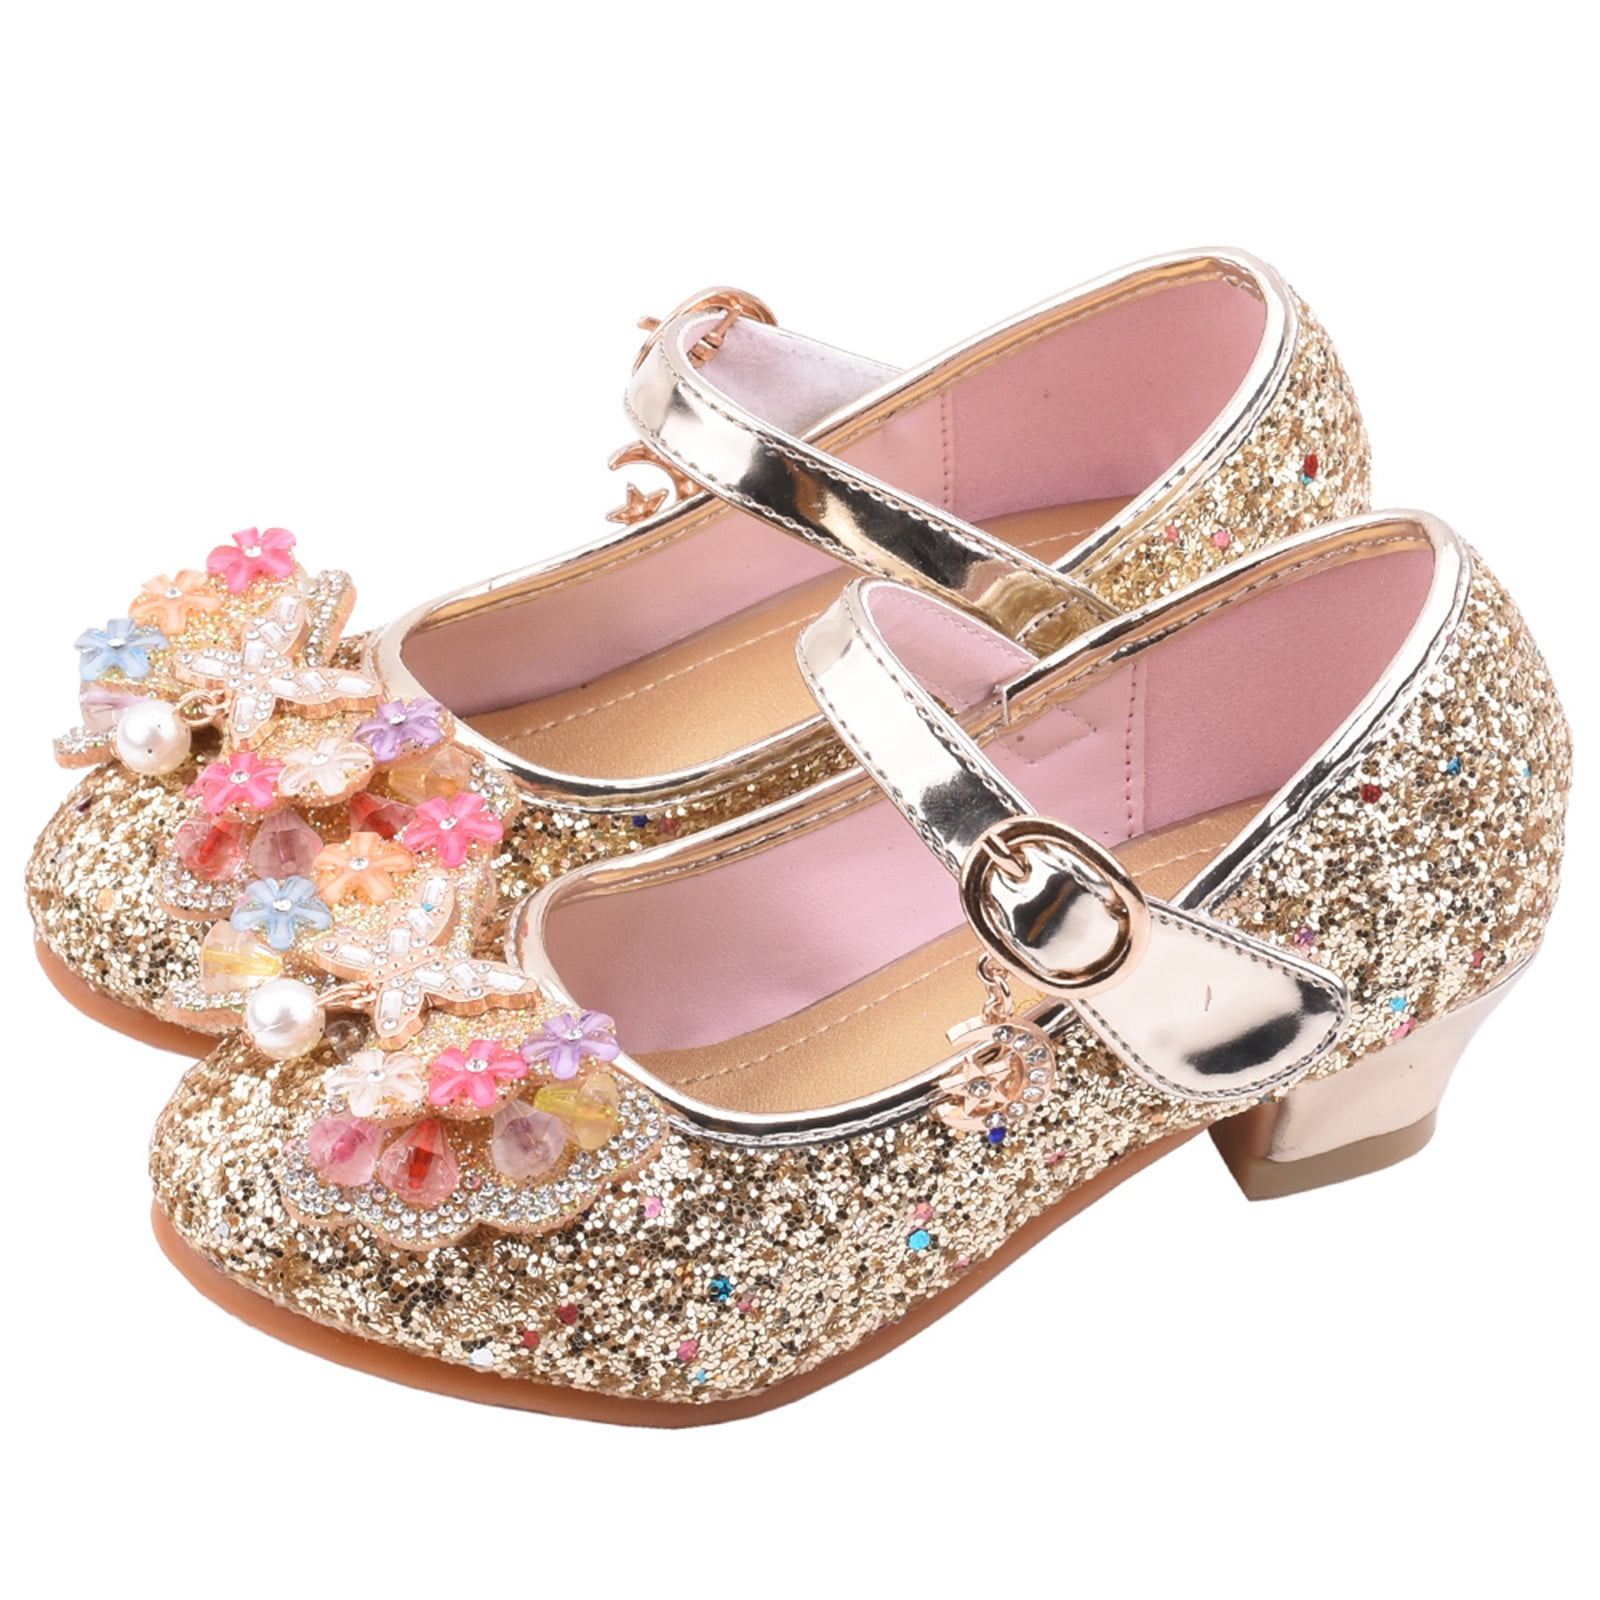 Toddler Child Kids Baby Girls Pearl Bling Sequins Single Princess Shoes Sandals 